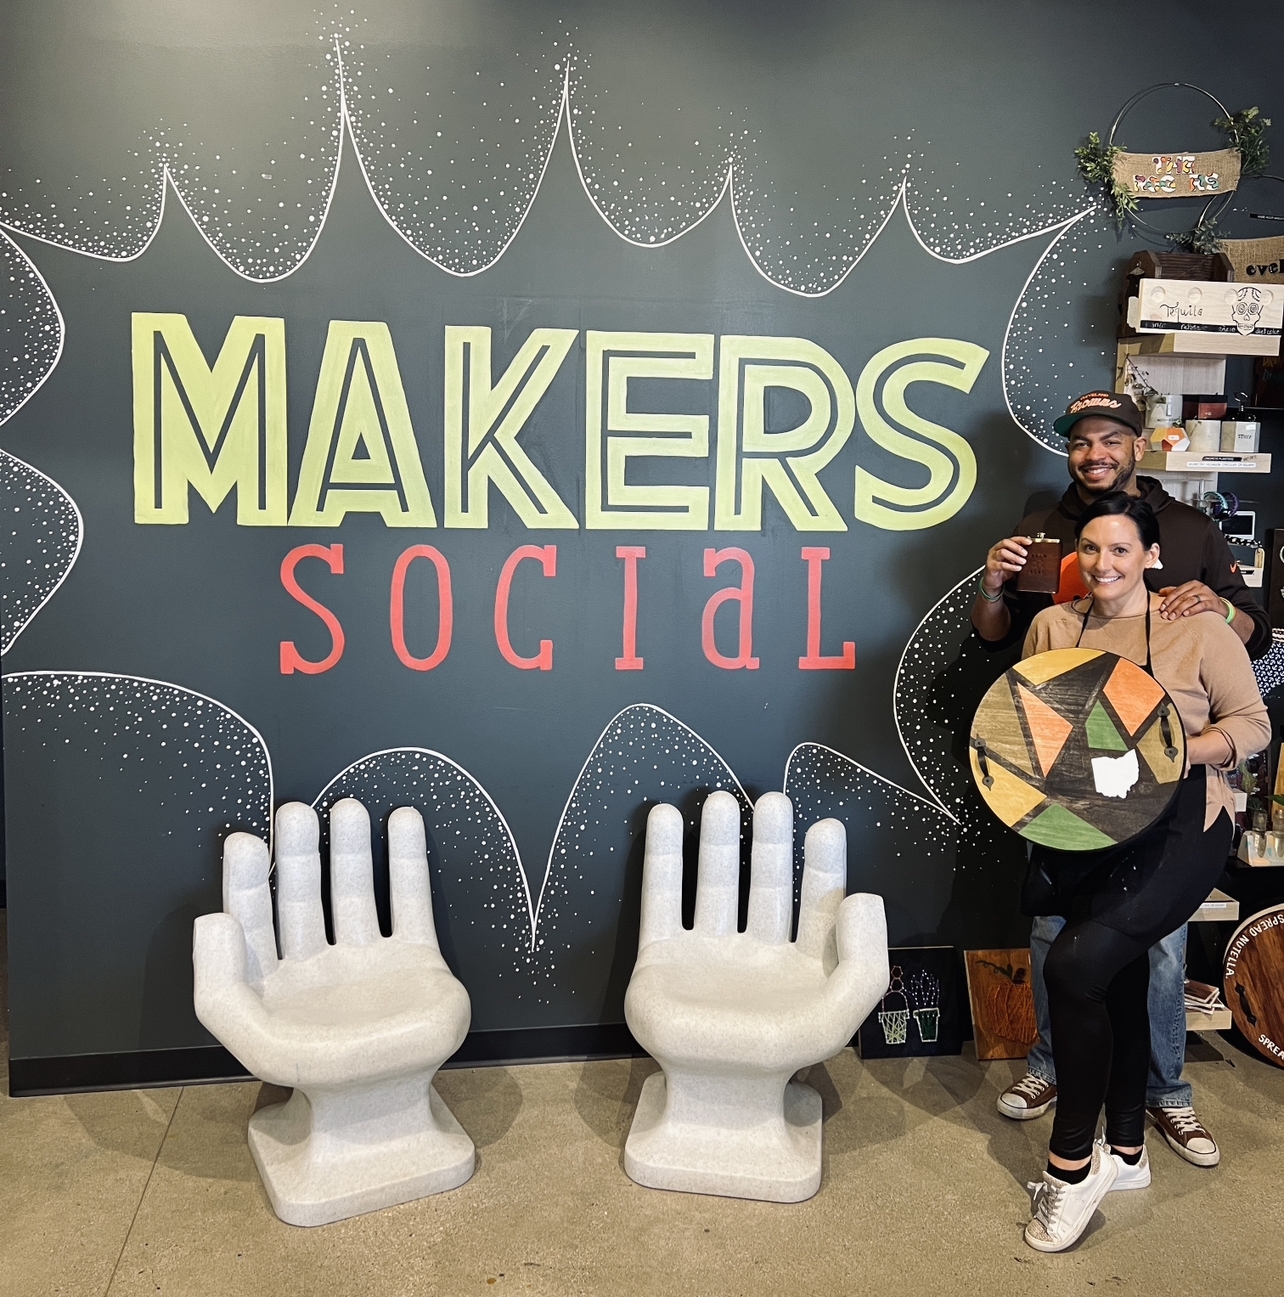 Makers Social is the Perfect Place for a Day Date